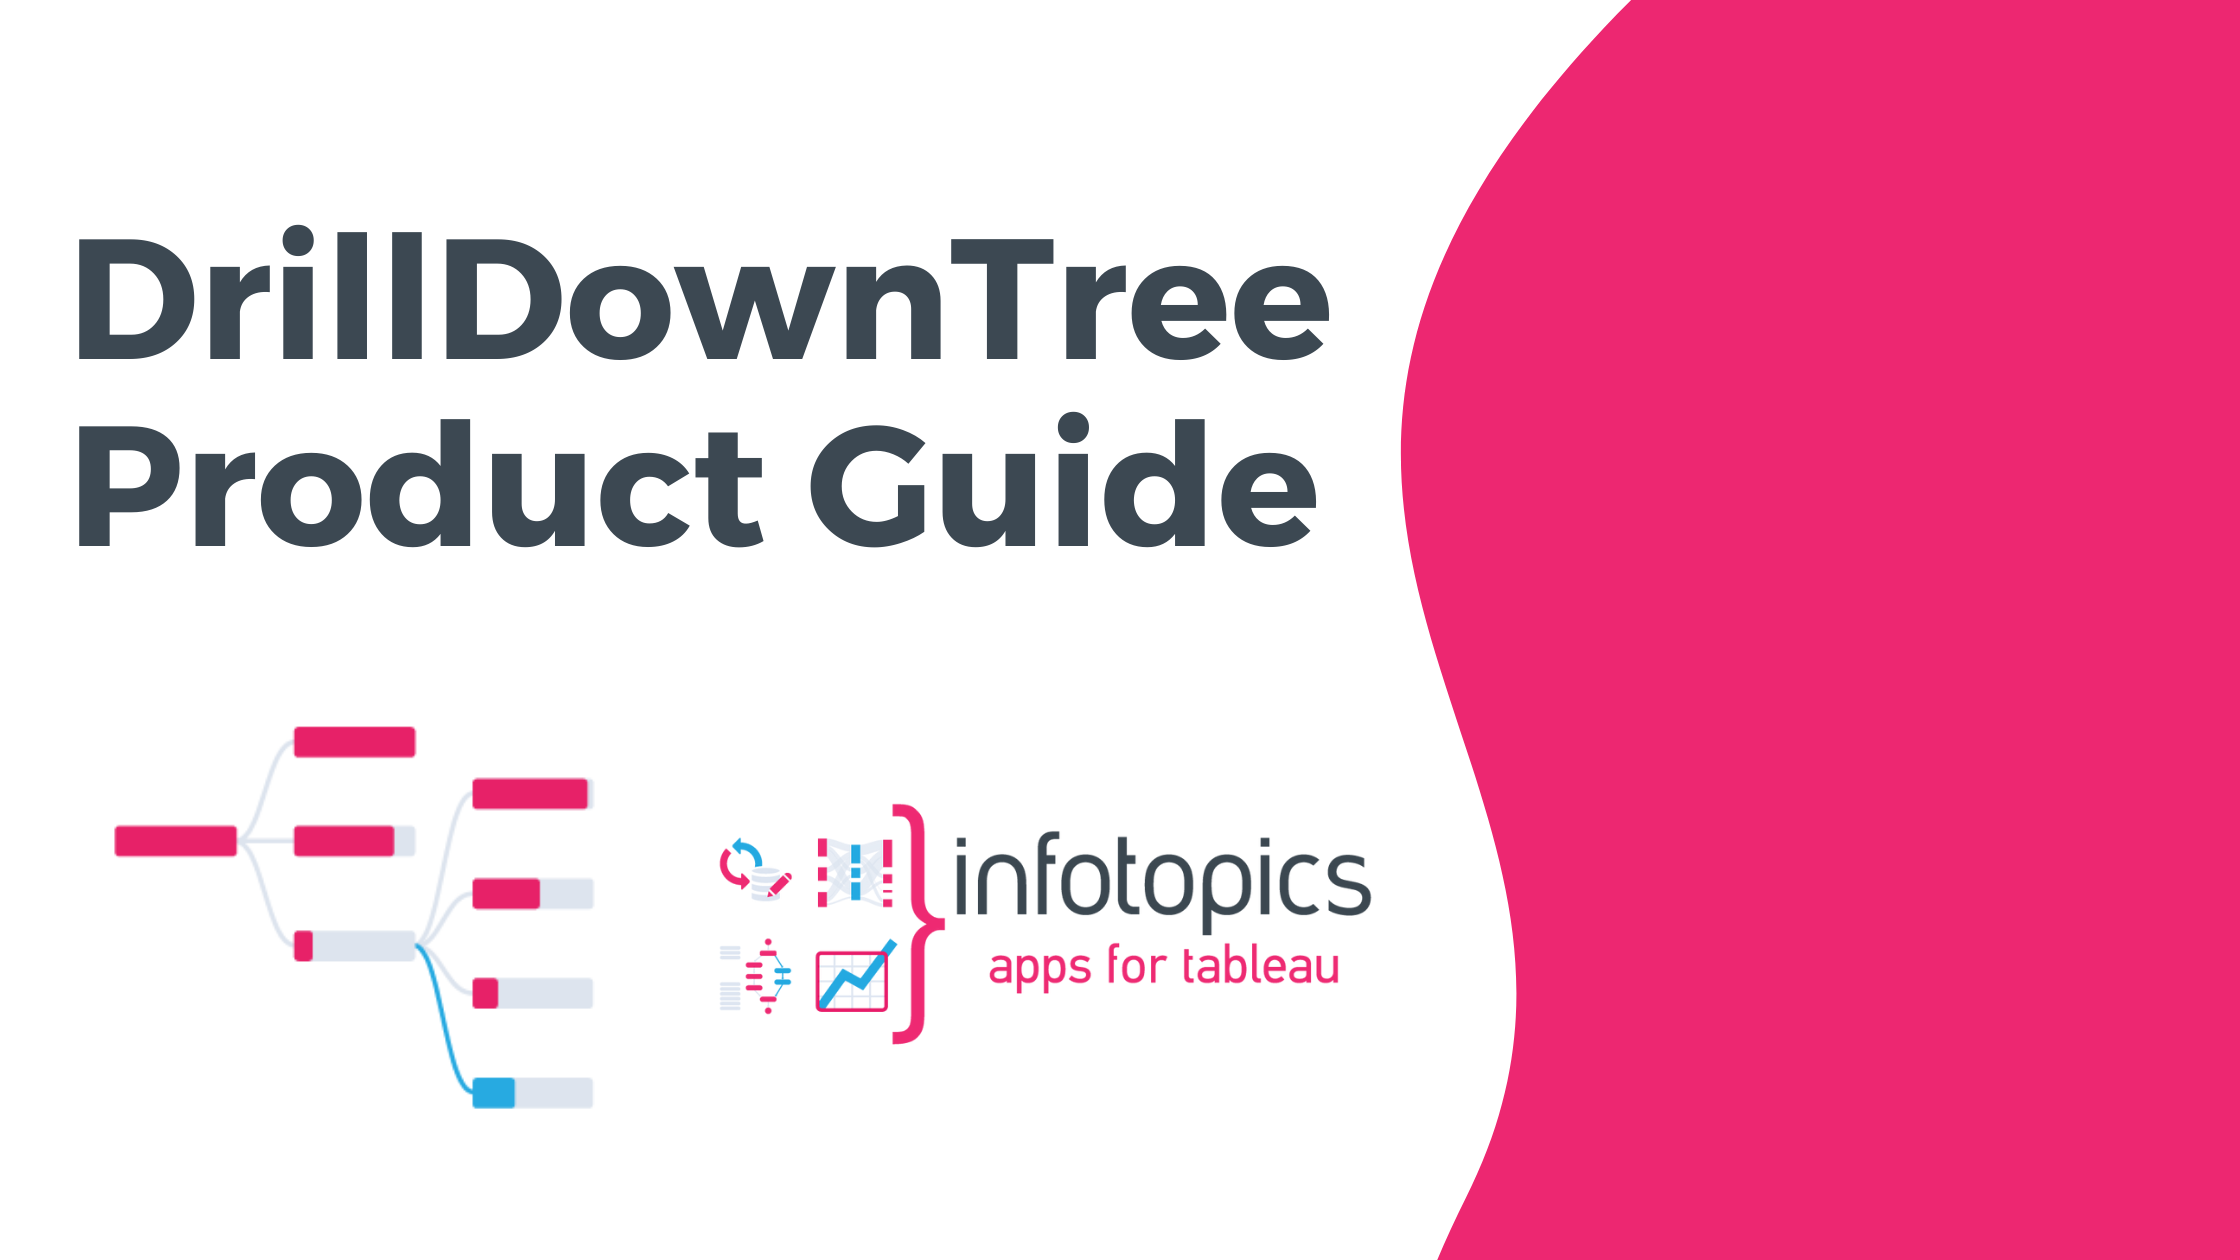 DrillDownTree Product Guide